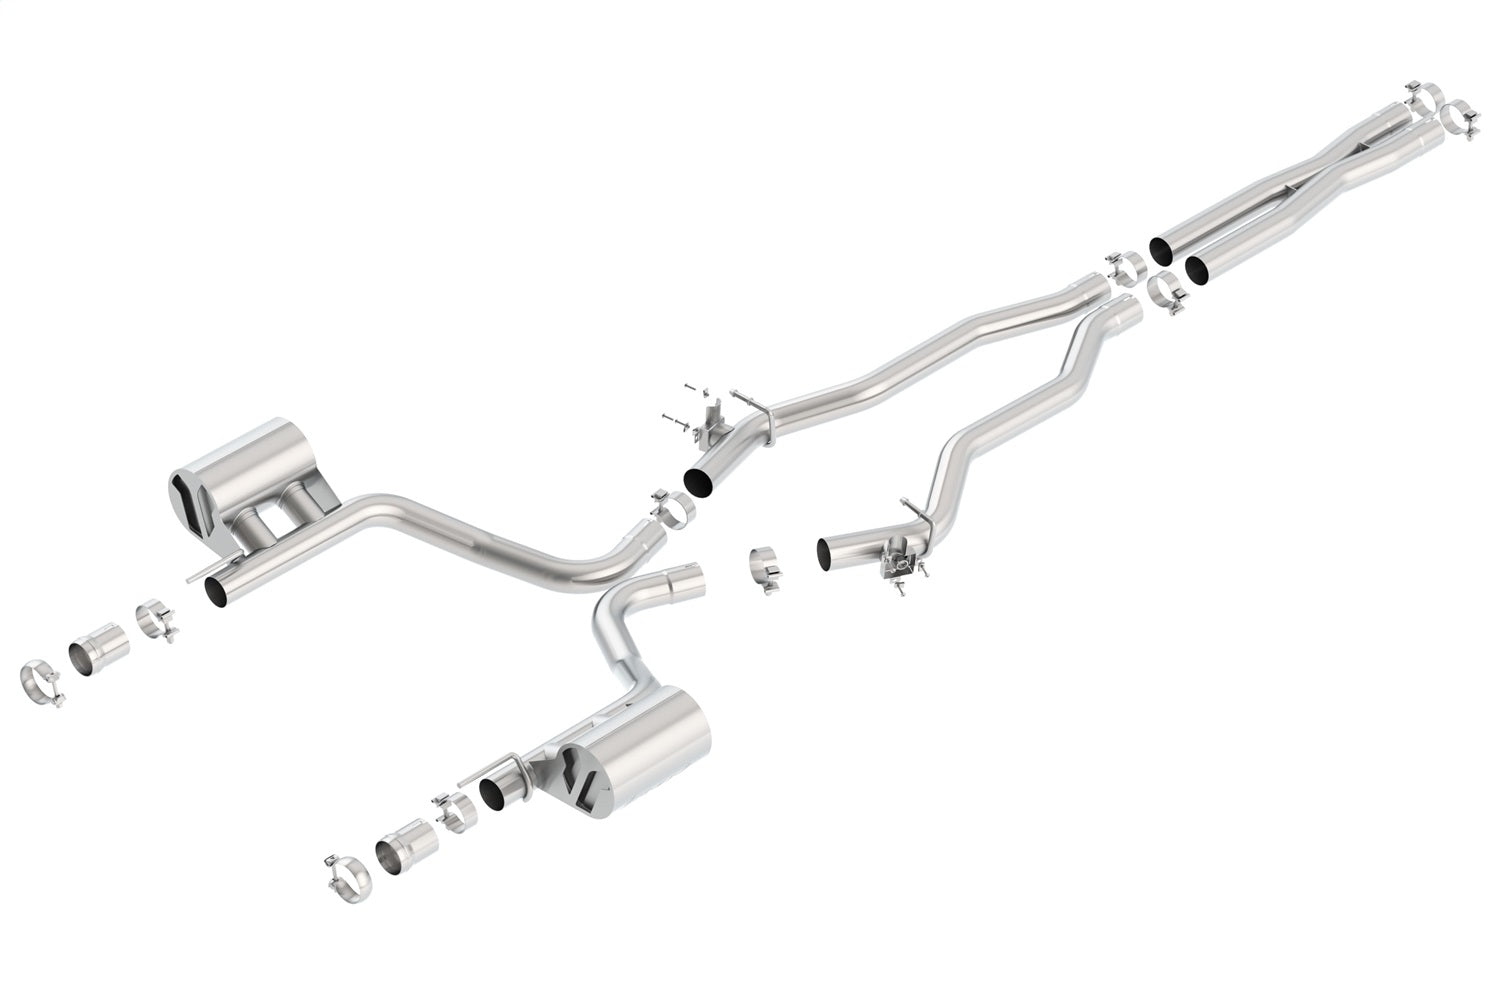 Borla 140675 ATAK Cat-Back Exhaust System Fits 15-21 Charger